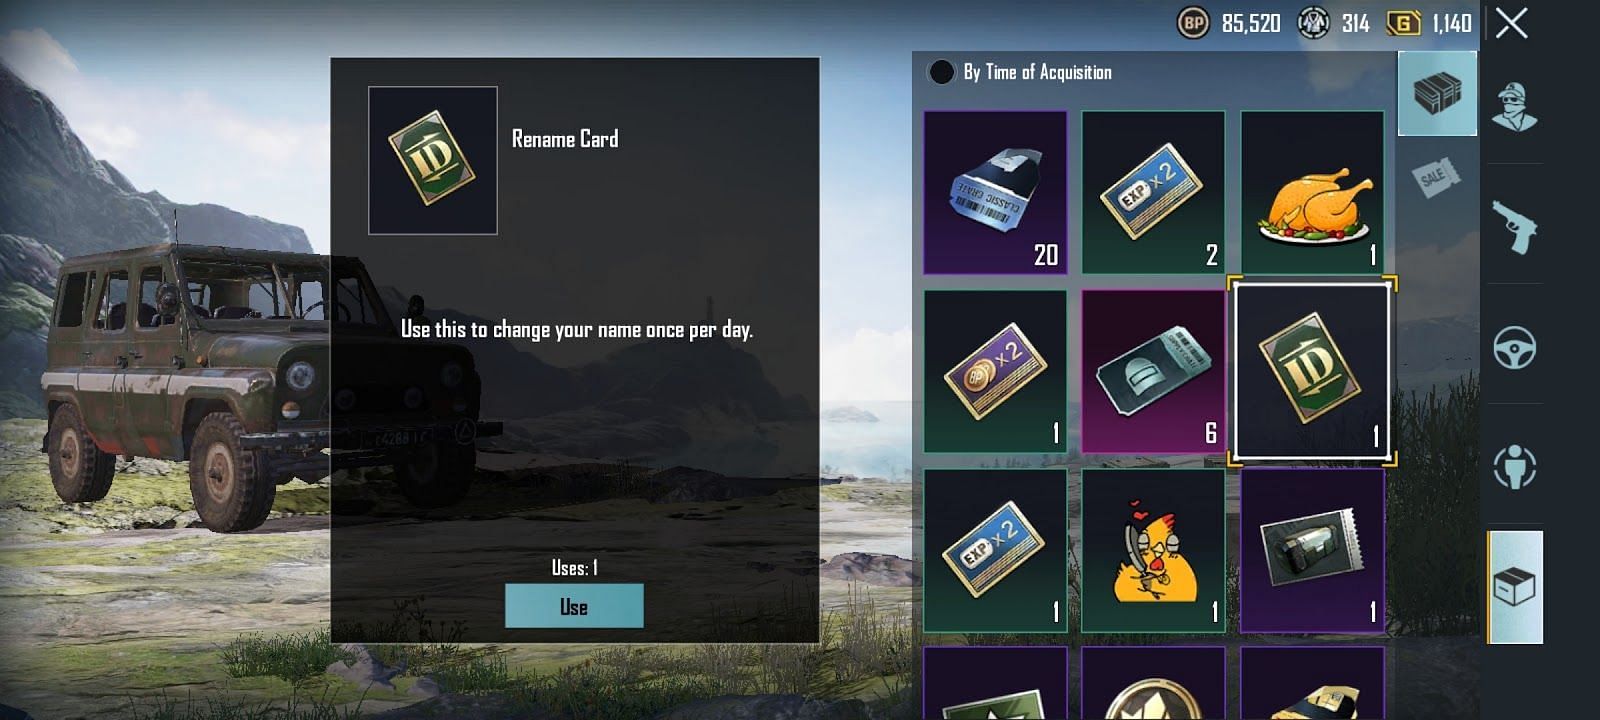 You can acquire a free Rename Card upon reaching Level 10 in Battlegrounds Mobile India (Image via Krafton)